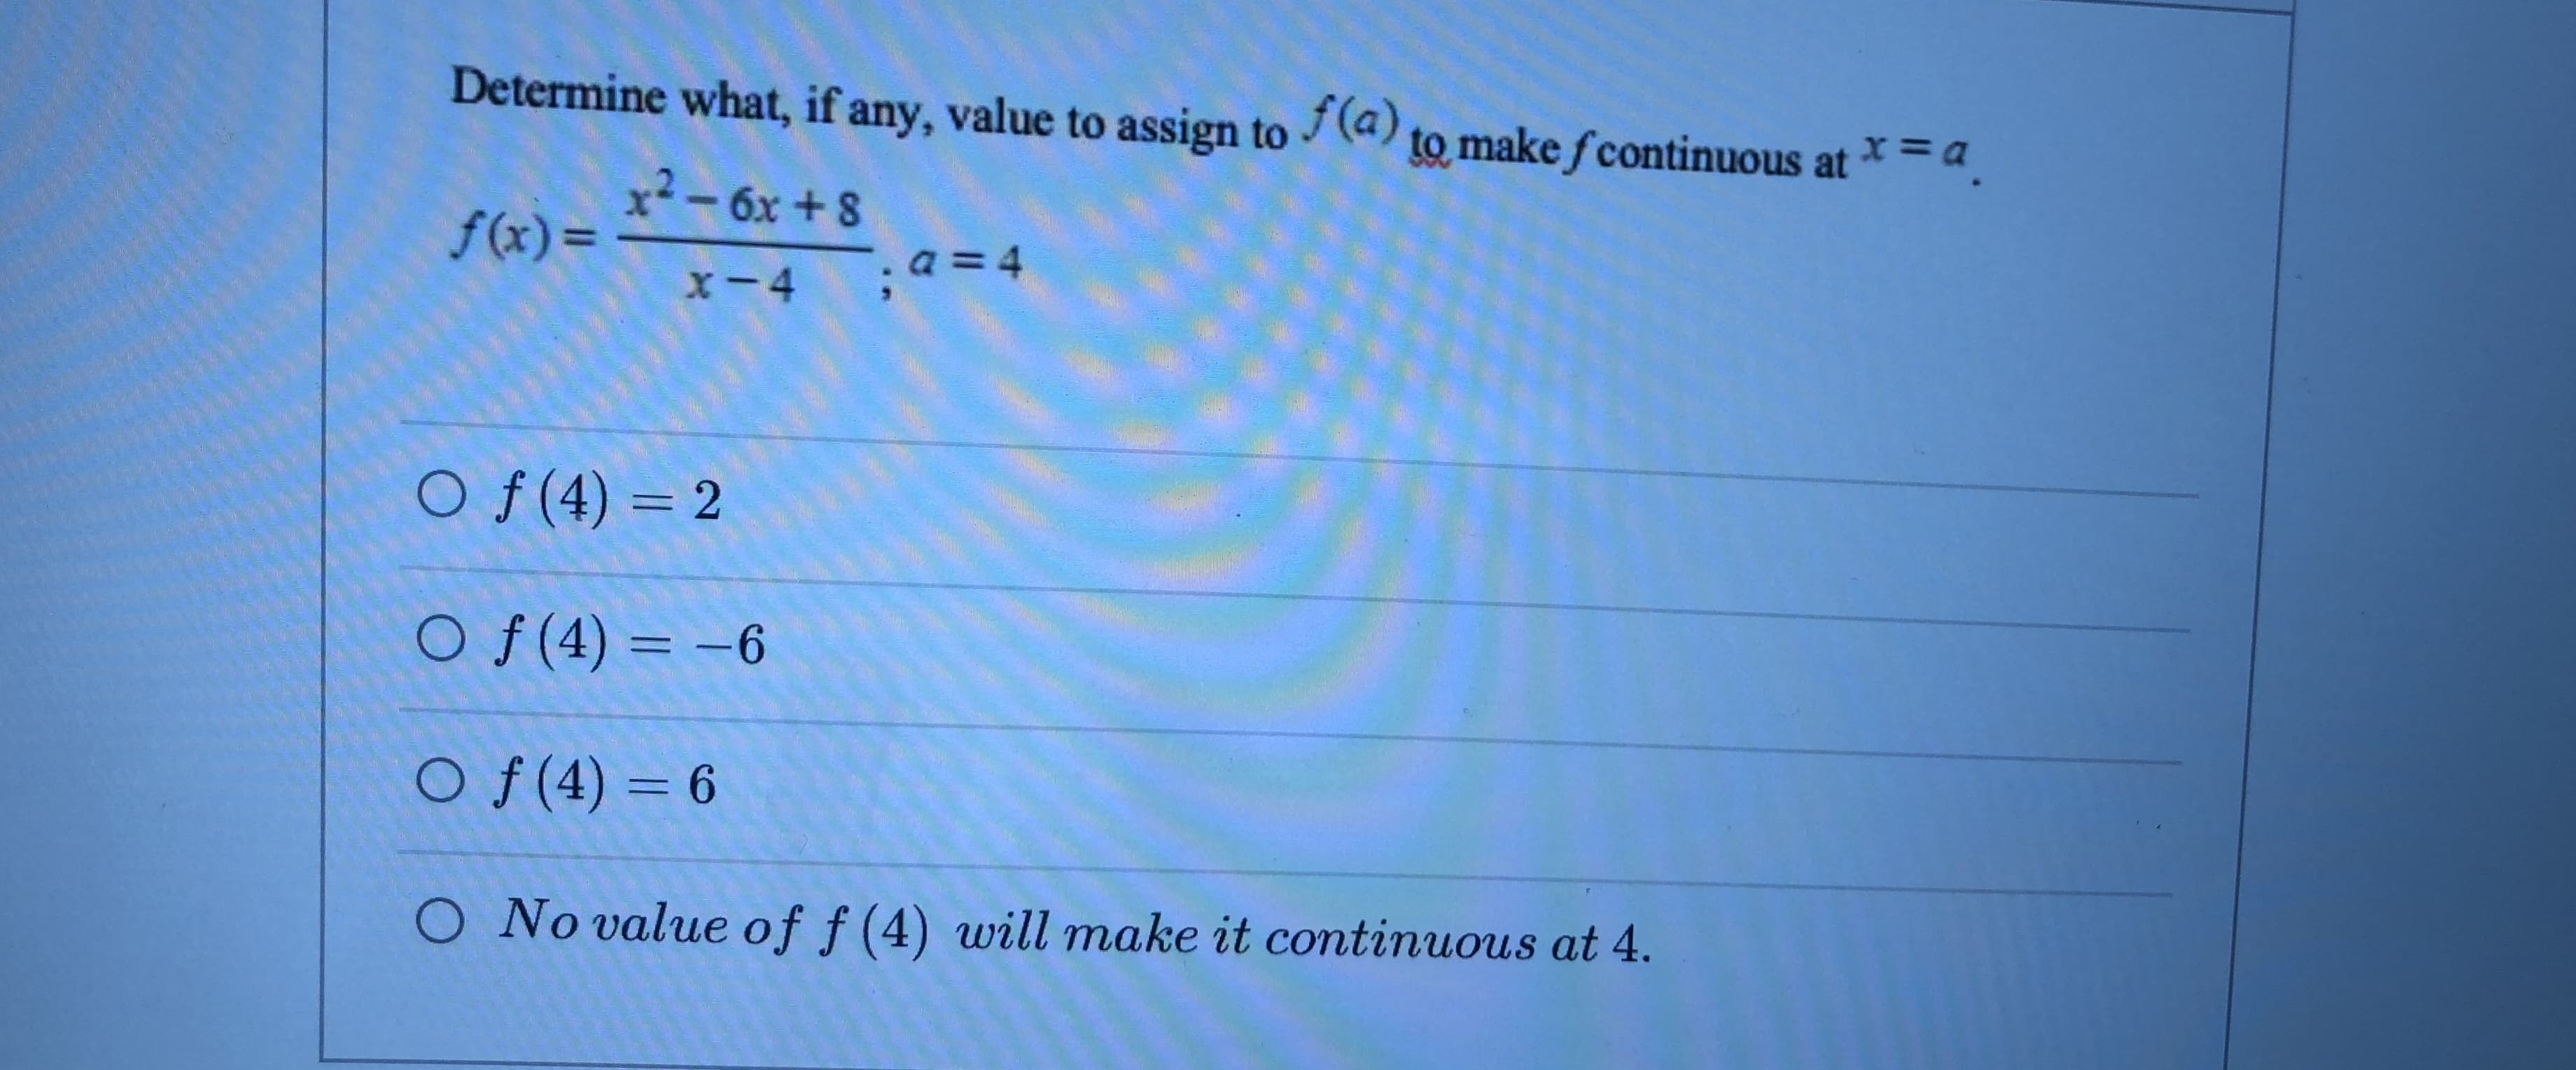 Determine what, if any, value to assign to (a) to make fcontinuous at *=a.
x²- 6x + 8
f(x)=
.a = 4
x-4
O f (4) = 2
Of (4) = -6
O f(4) = 6
O No value of f (4) will make it continuous at 4.
